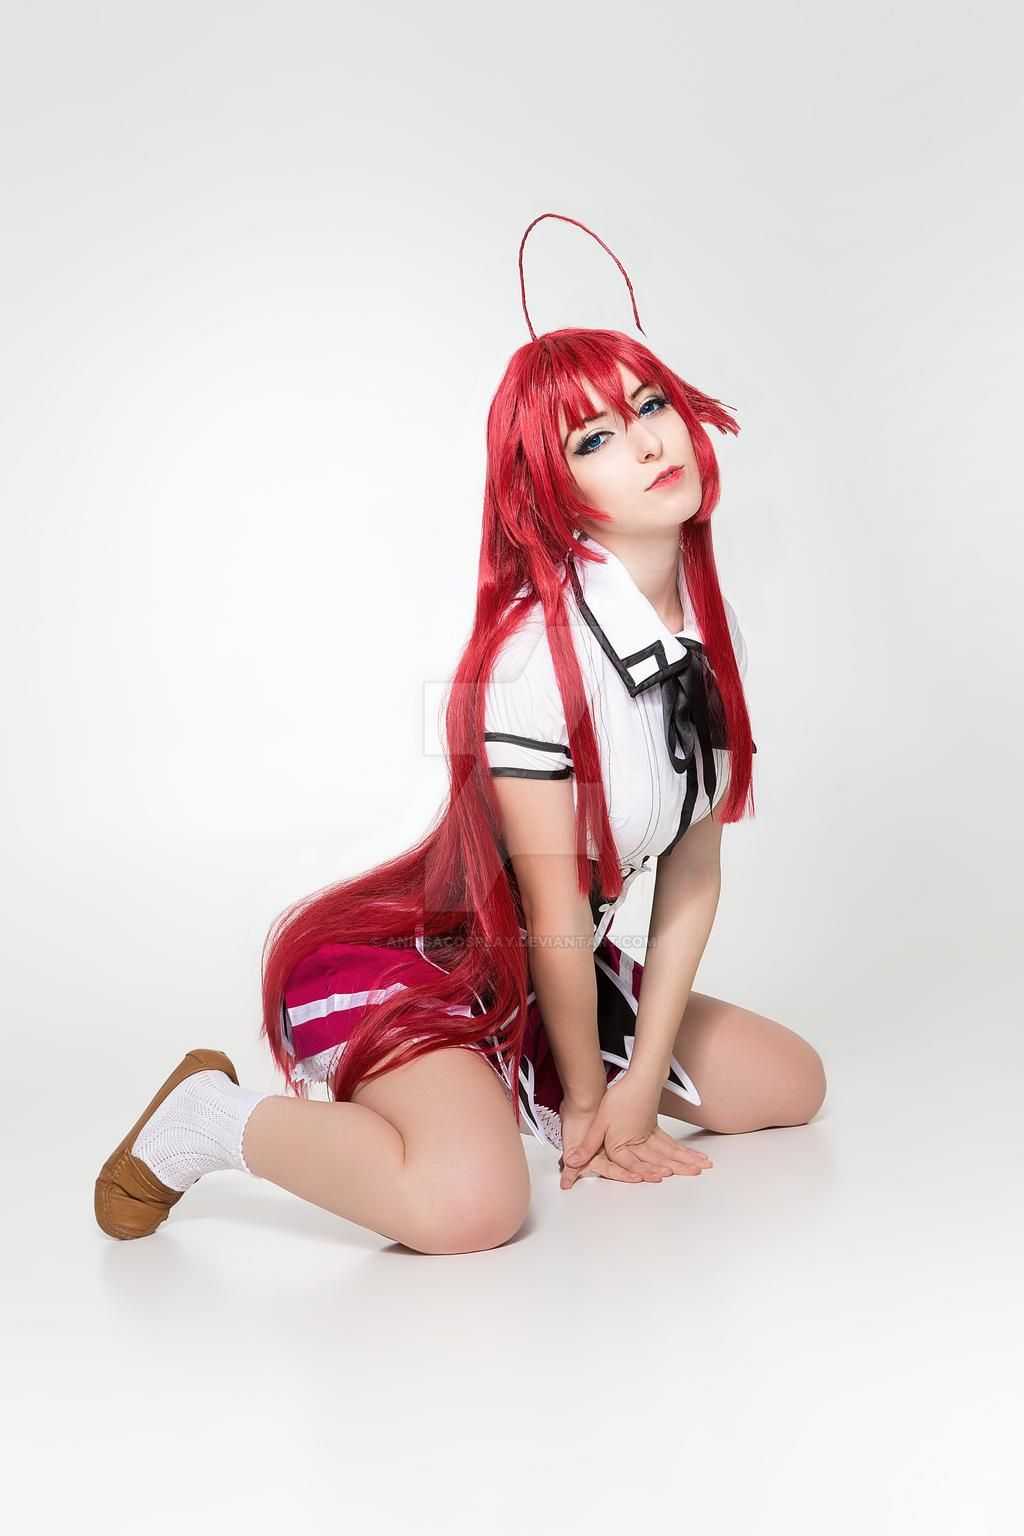 50 Rias Gremory Nude Pictures Are Hard To Not Notice Her Beauty 21